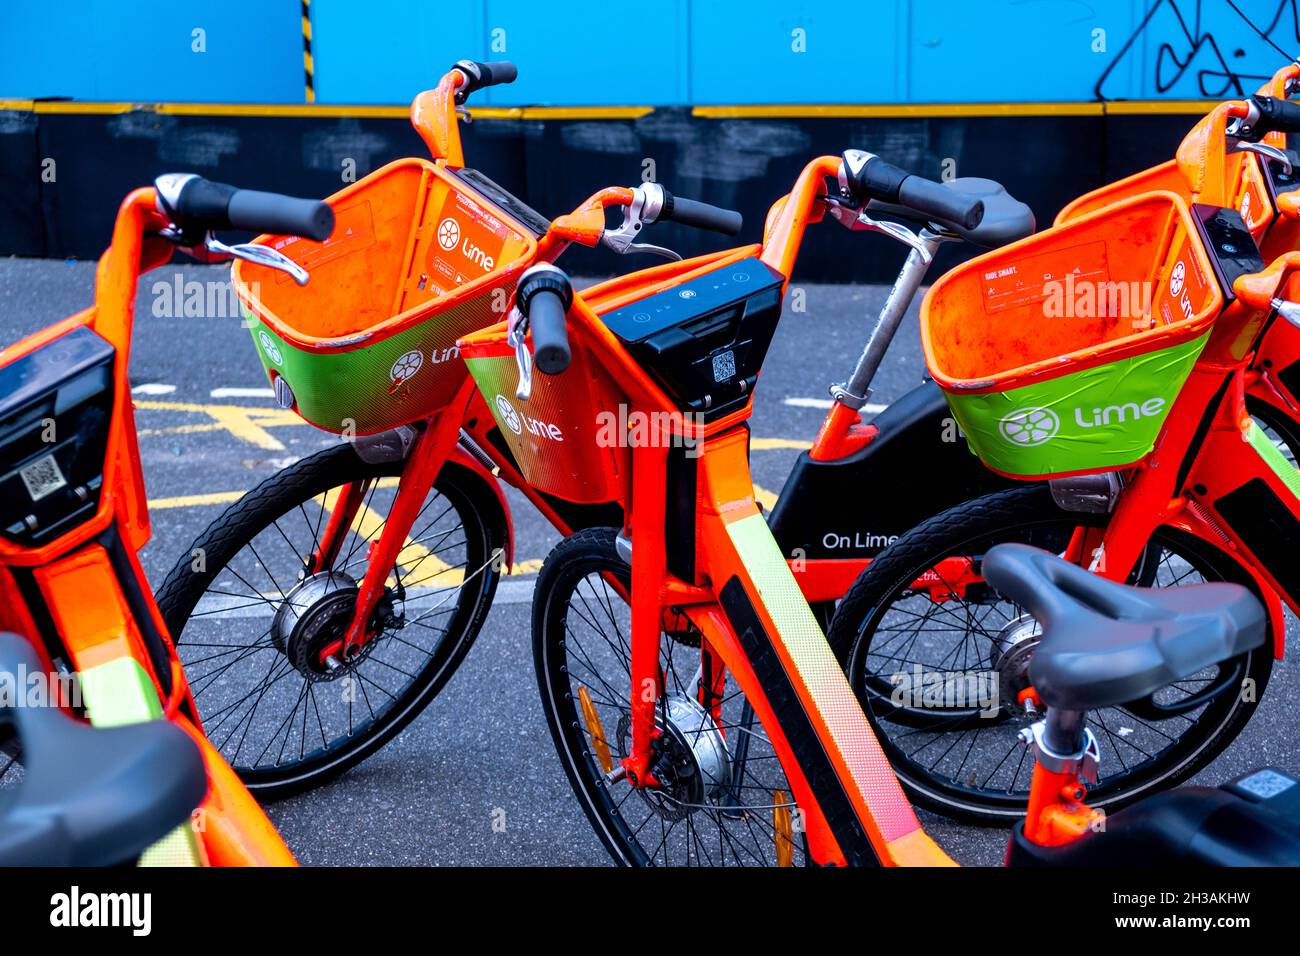 Collection Of Lime Environmentally Friendly Green Travel Or Transport Electric Push Bikes Parked In Central London Stock Photo